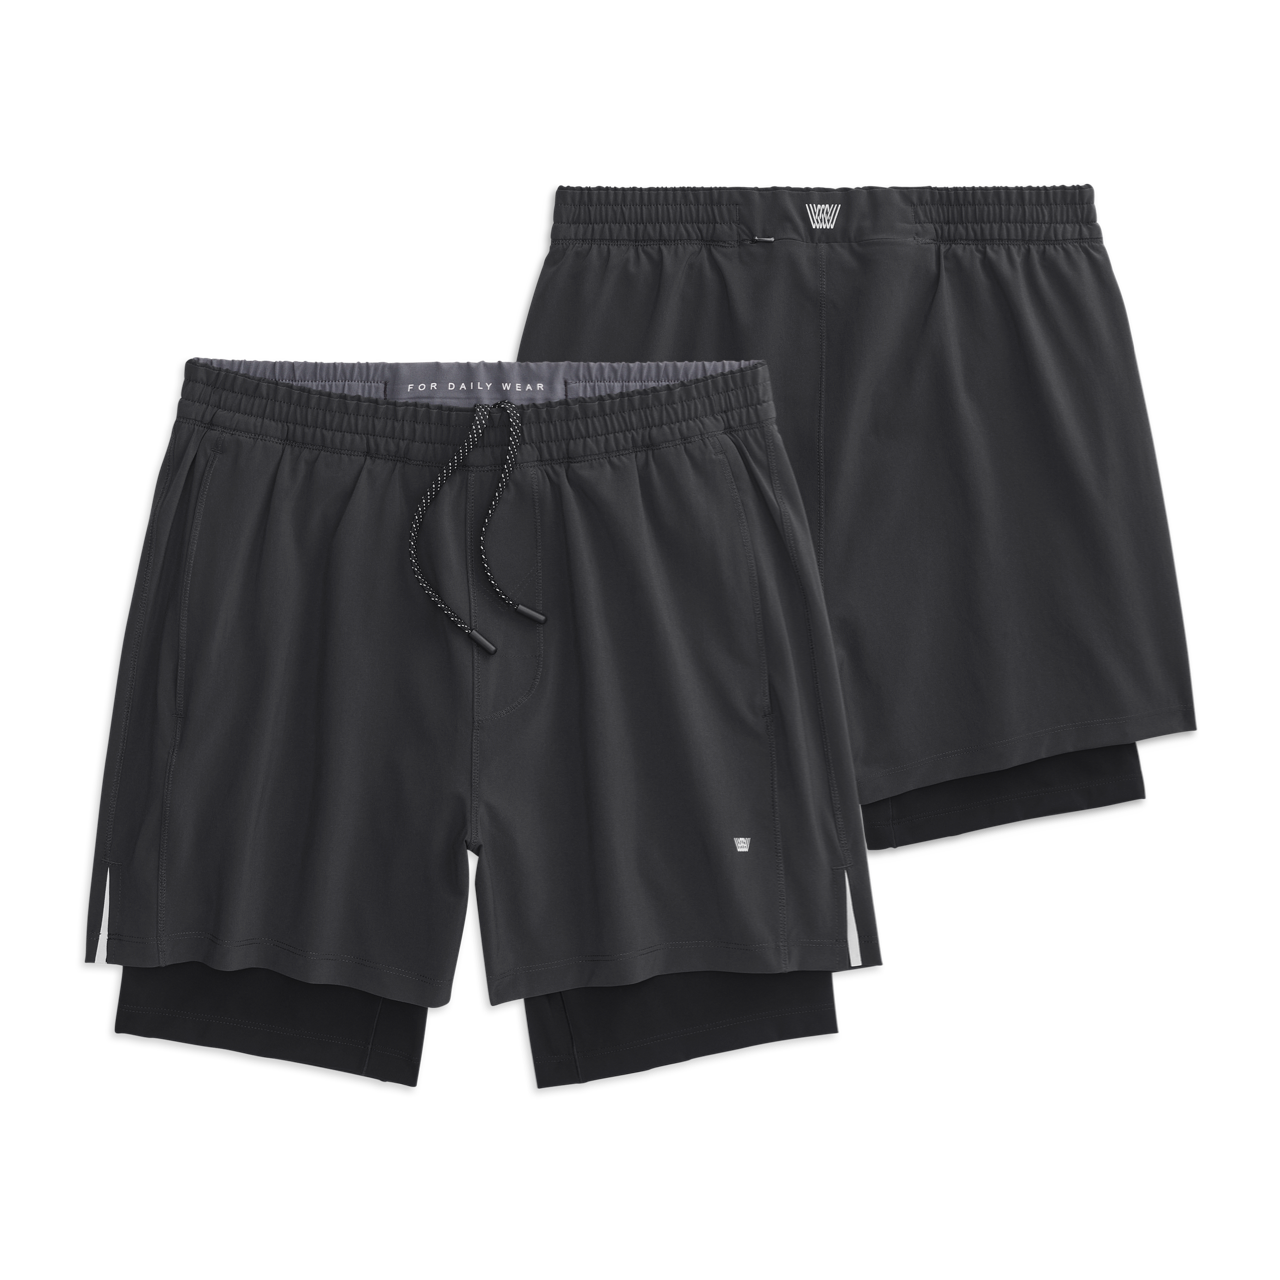 Limitless Compression Short, Charcoal